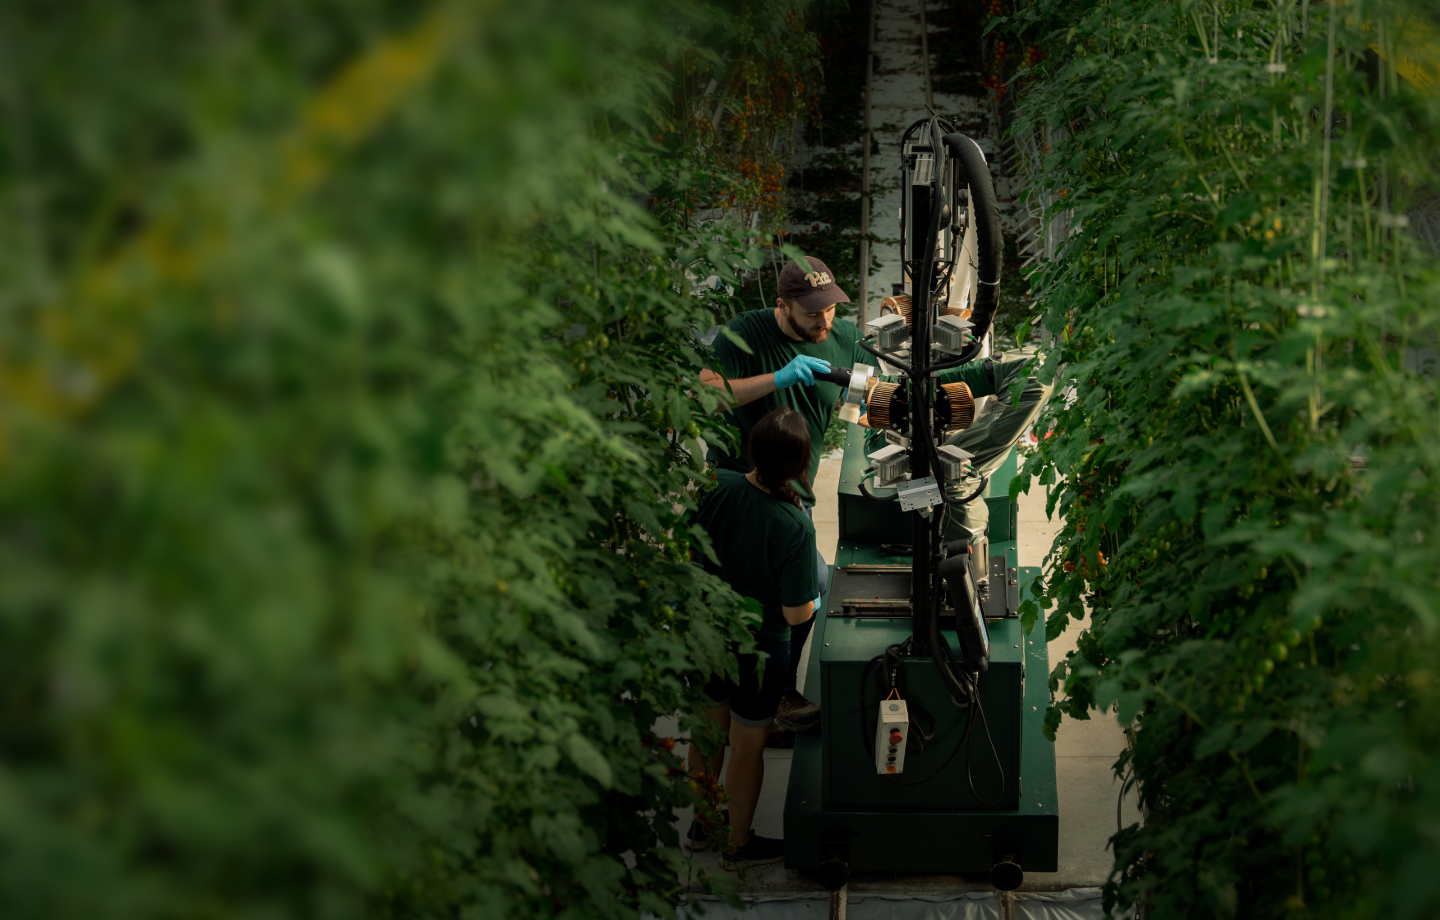 Technicians interact with a GR-100 tomato harvesting robot in a greenhouse.